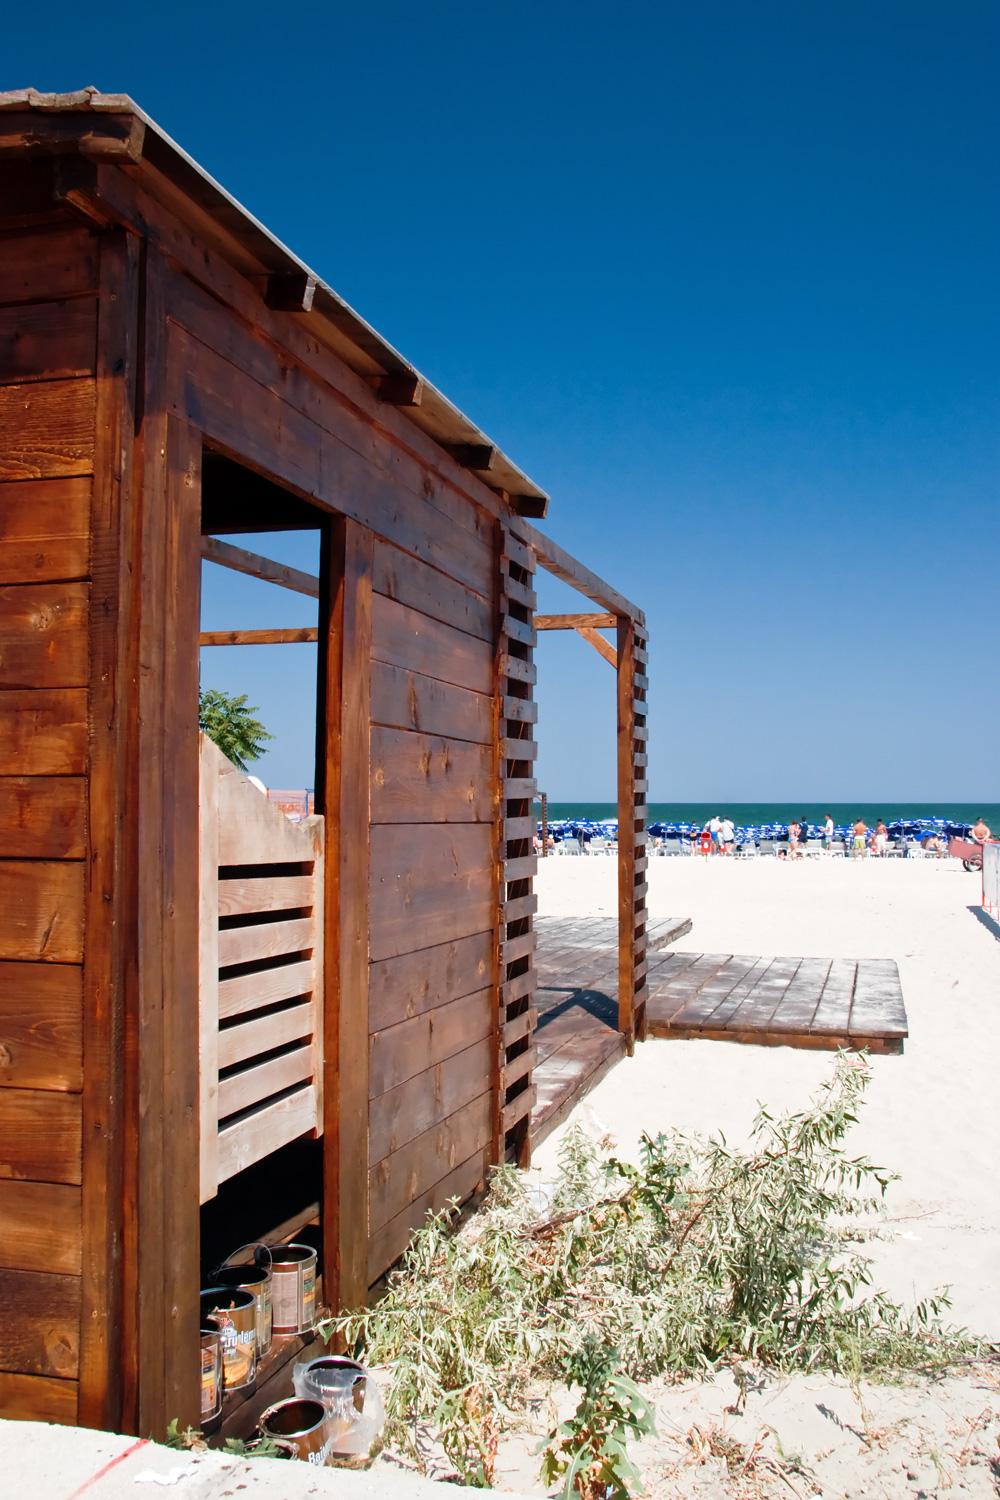 Wooden shed under construction on the beach